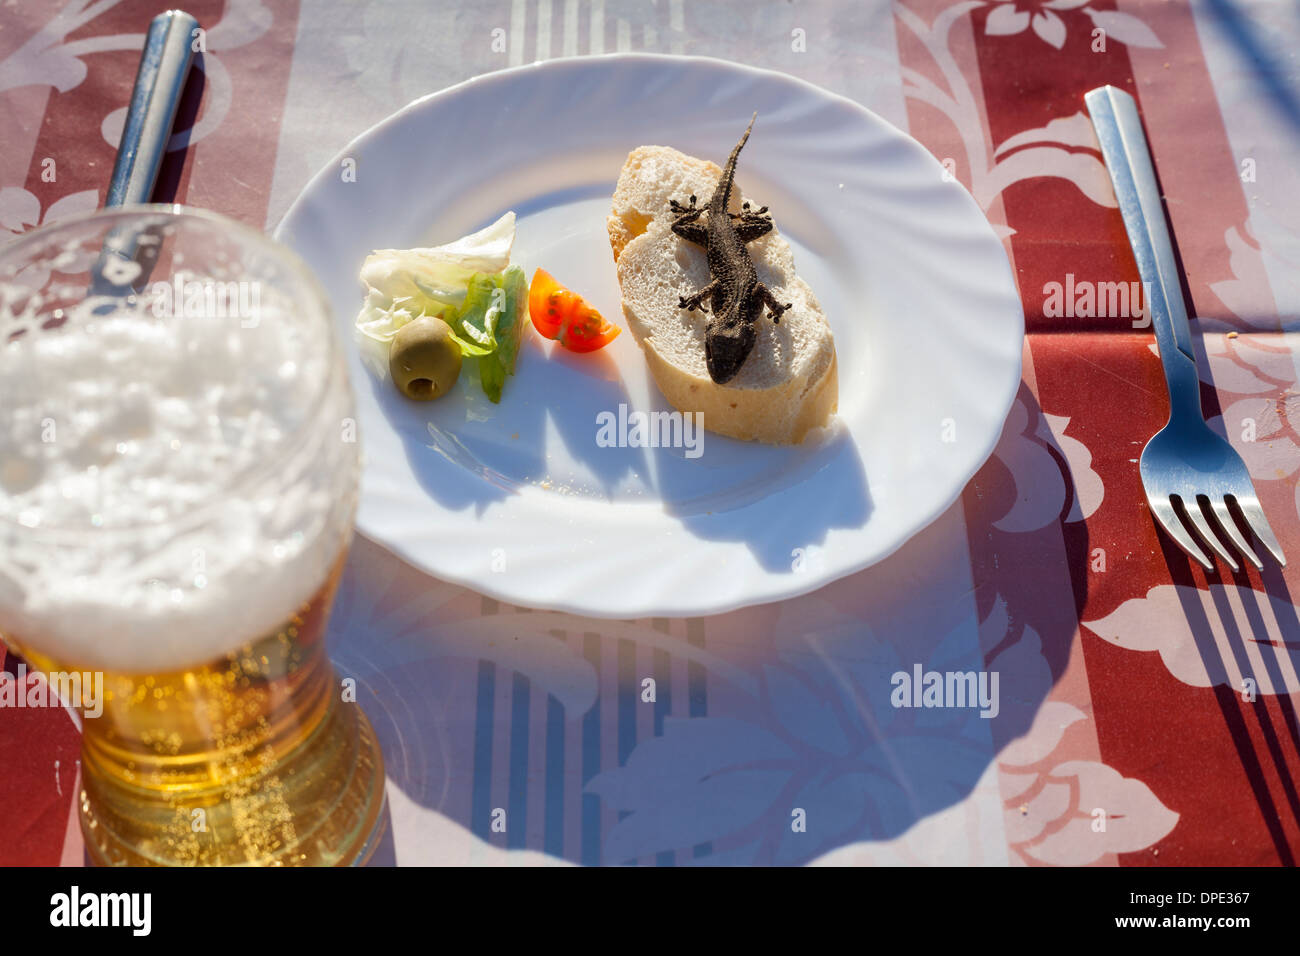 Unusual dish with lizard, bread, vegetable and glass of beer. Stock Photo